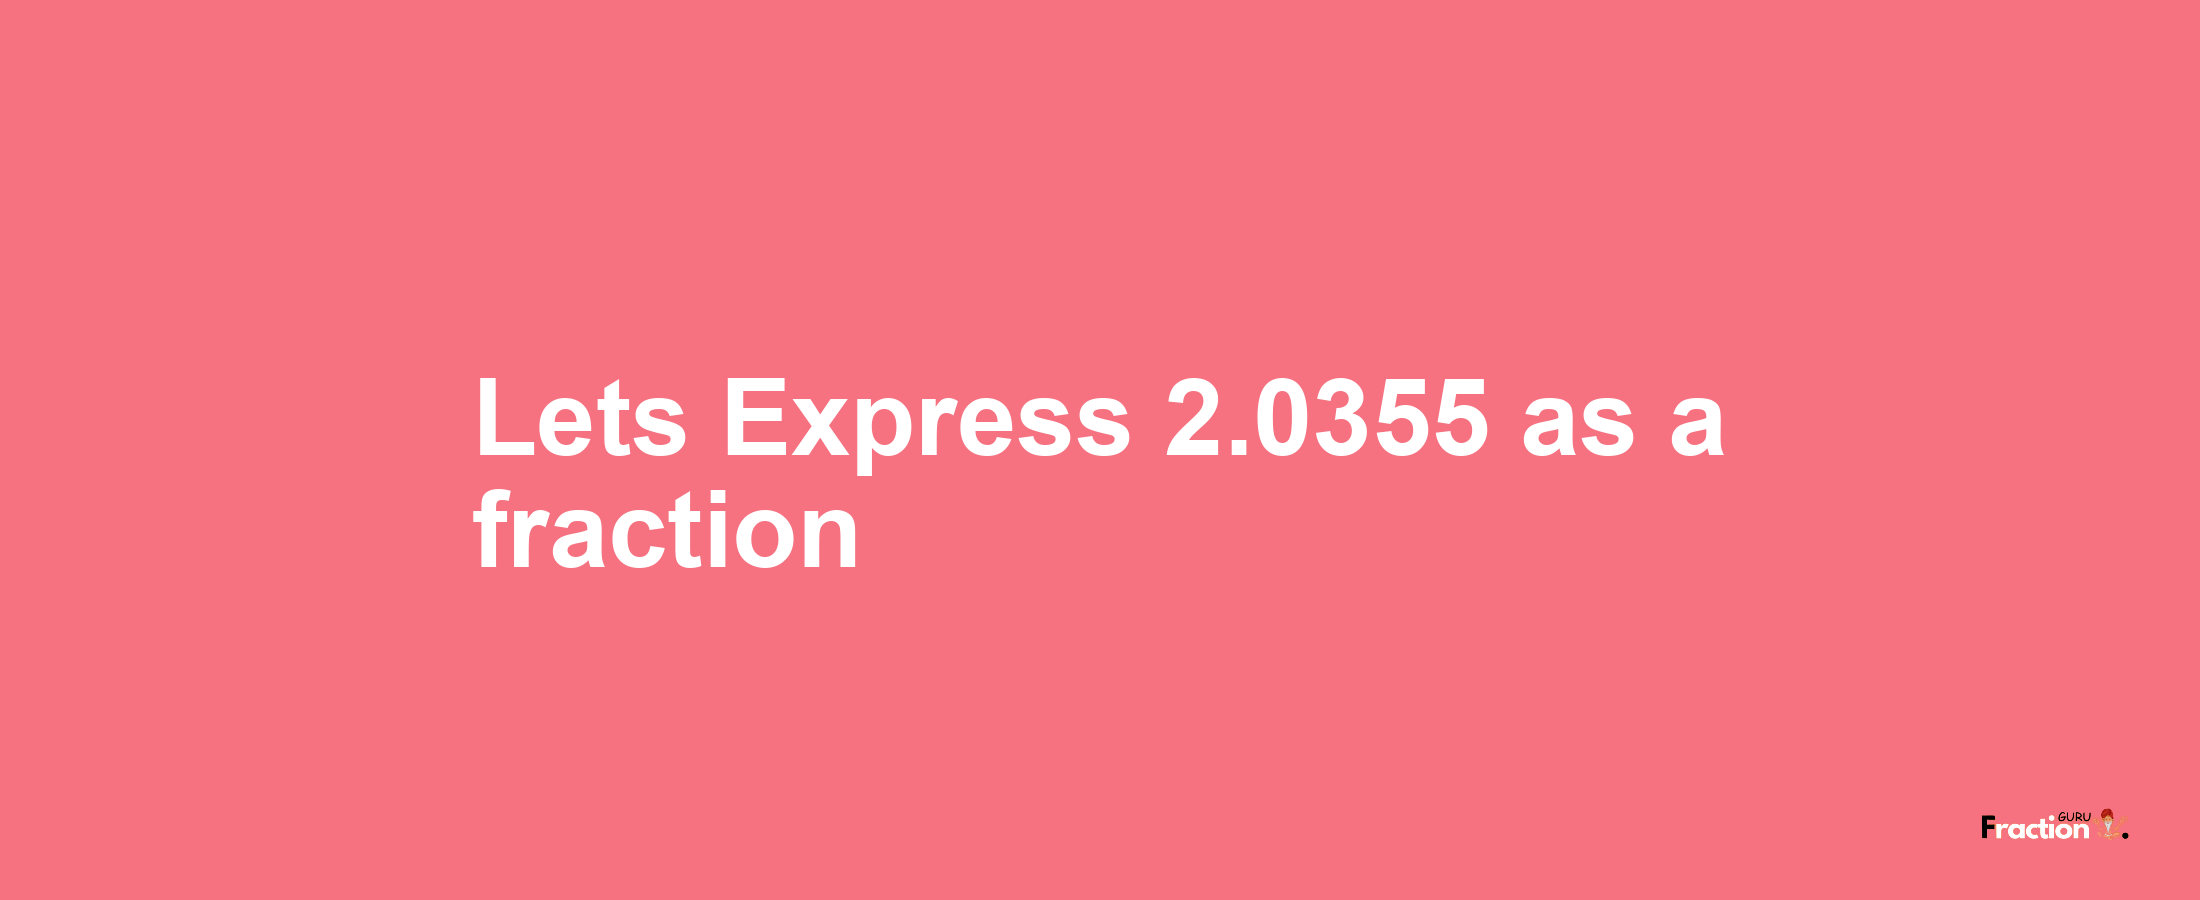 Lets Express 2.0355 as afraction